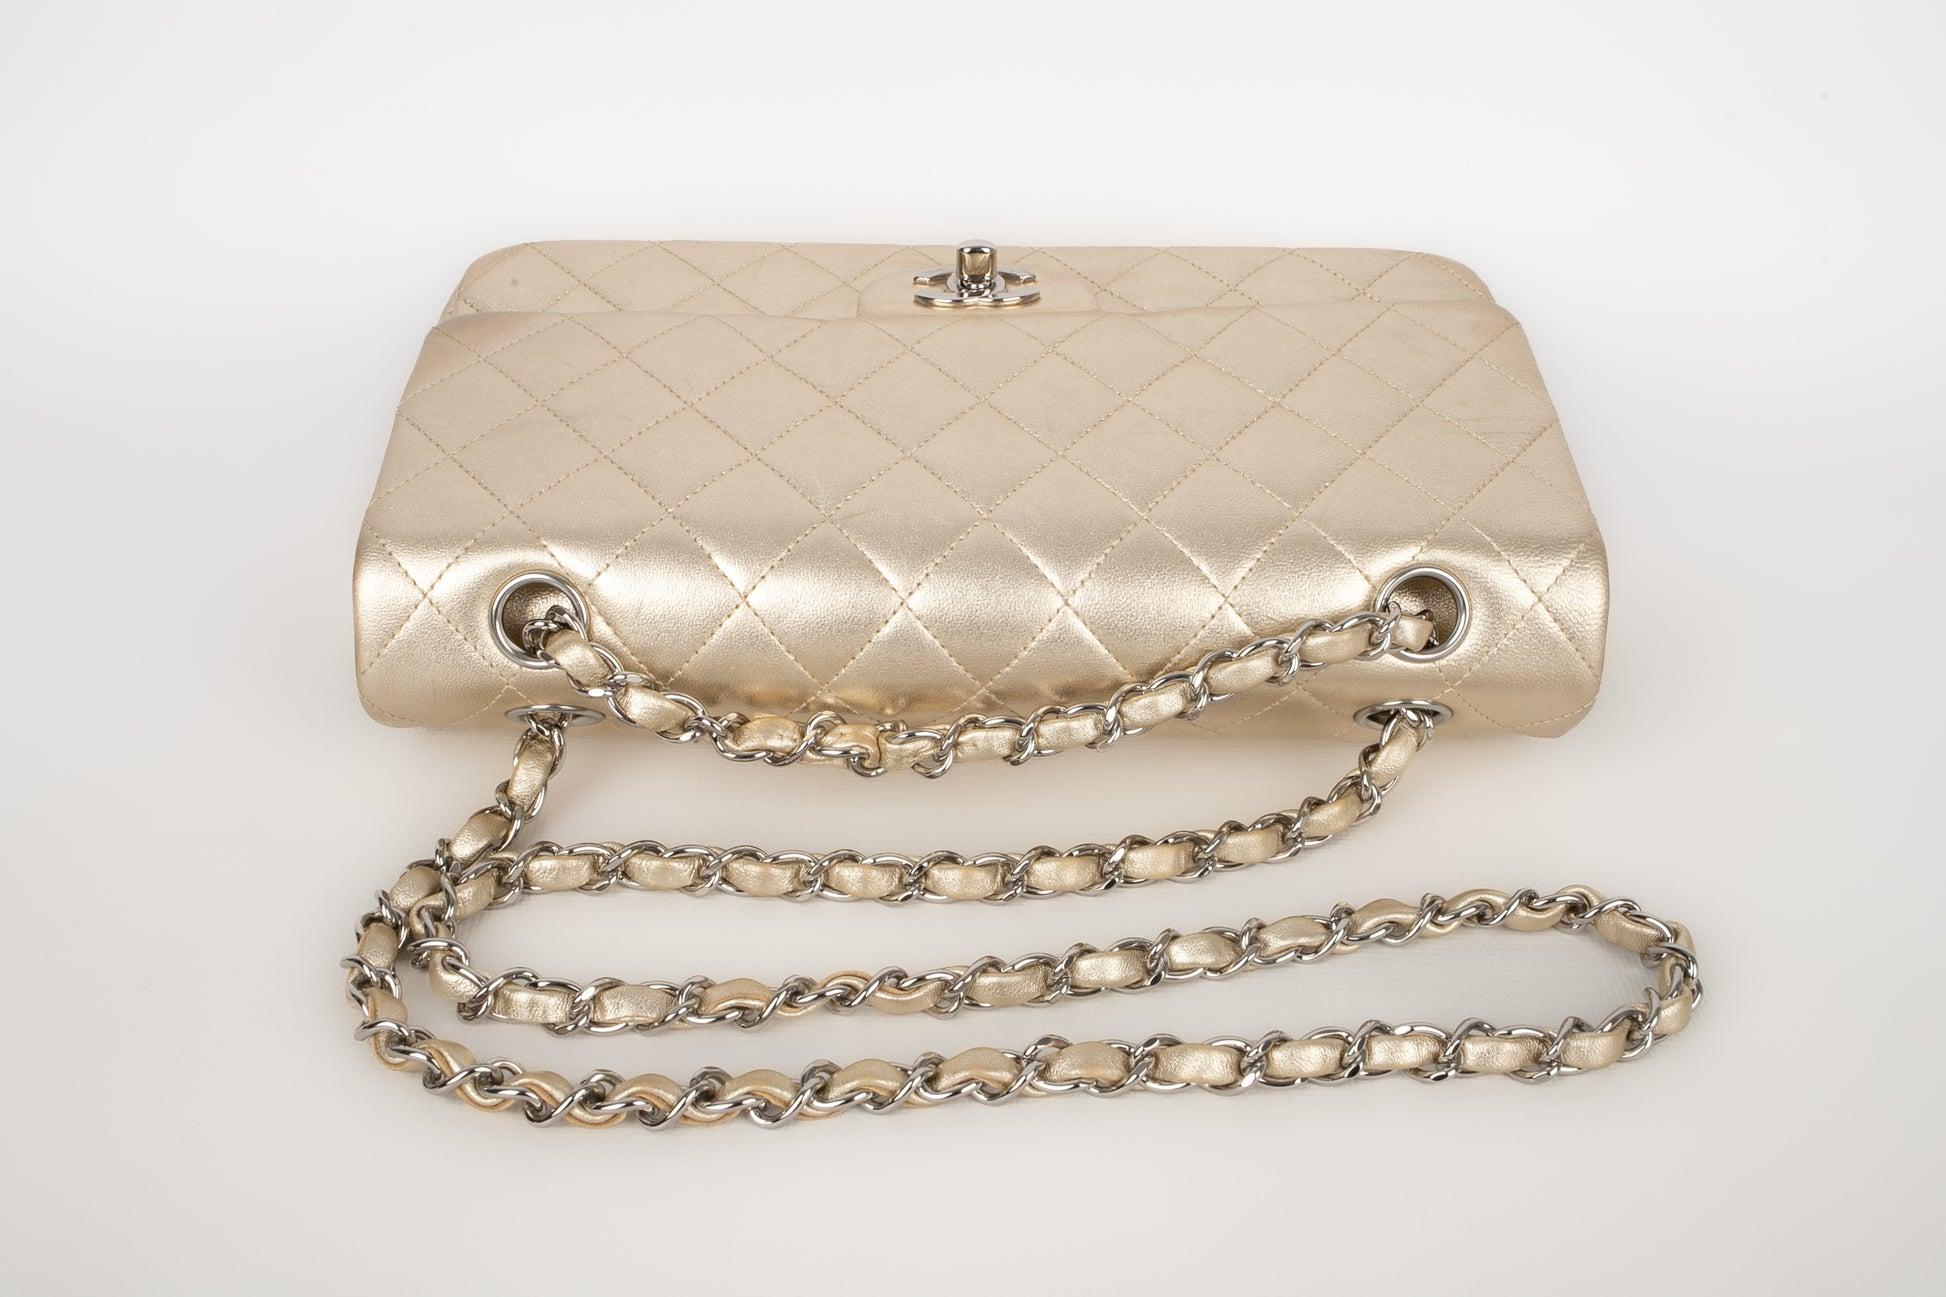 Chanel Timeless Pale-Golden Metallic Lamb Leather Classic Bag, 2006/2008 For Sale 2